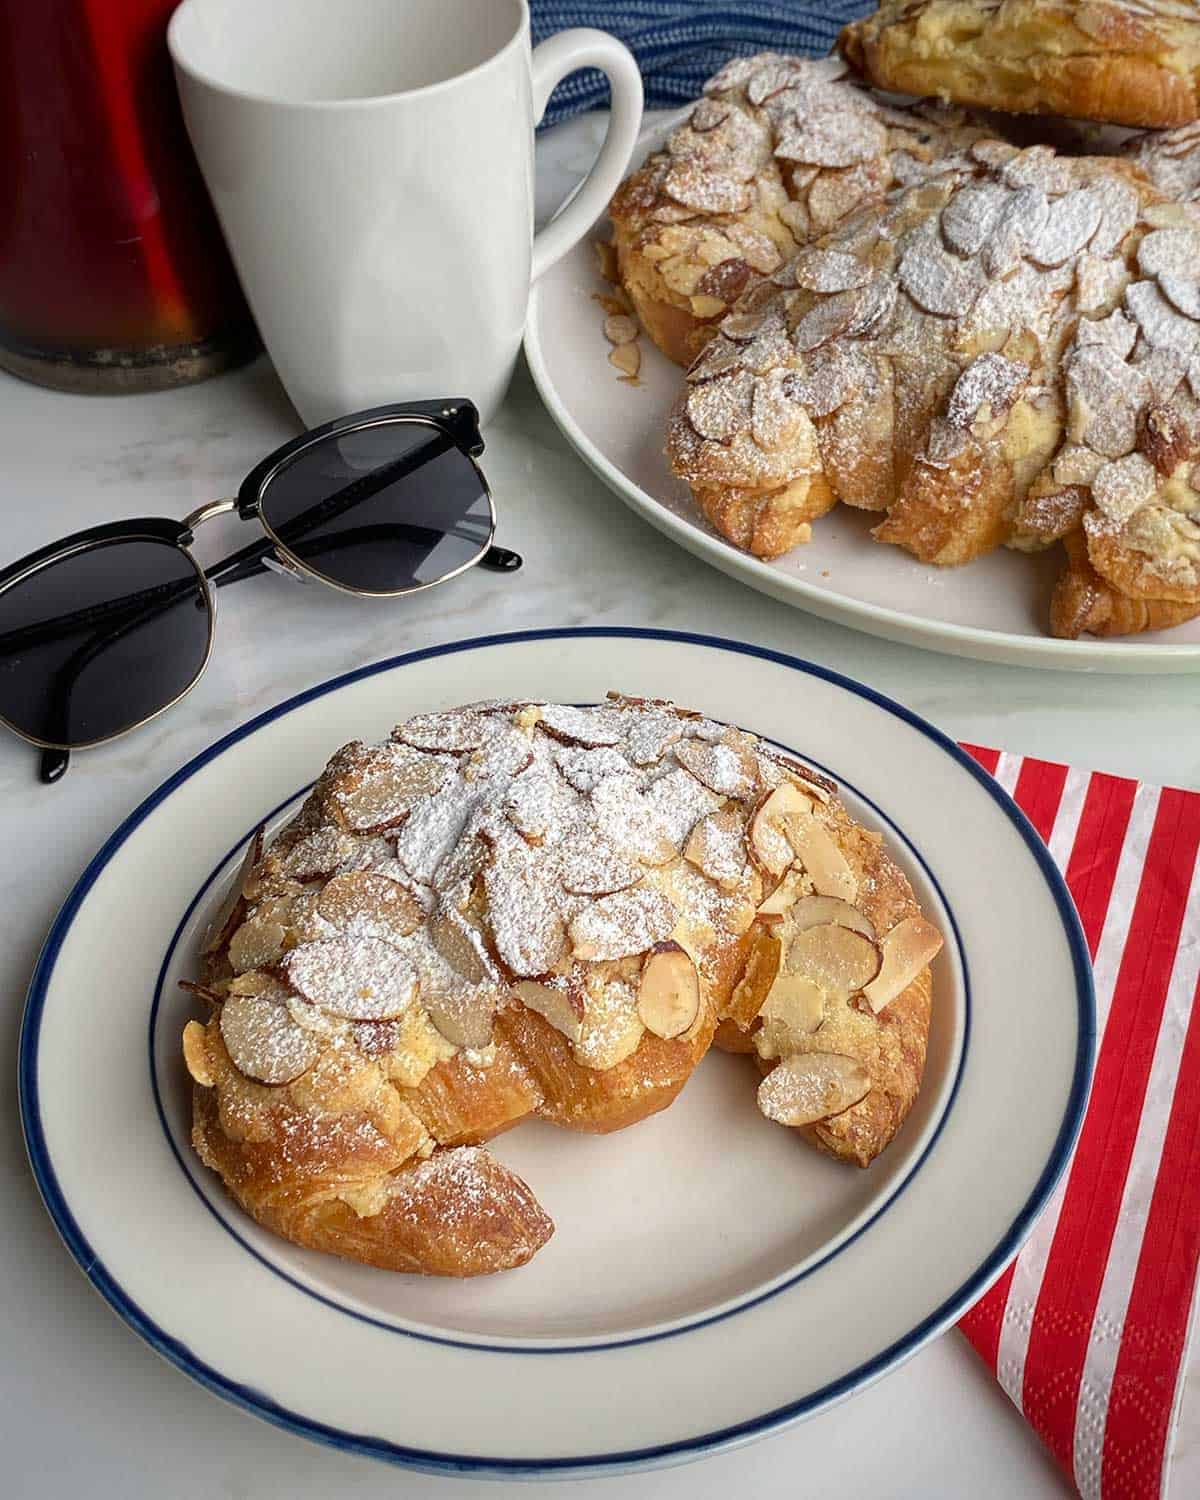 An Almond Croissant on a white plate next to some sunglasses, a mug and a plate of almond croissants.